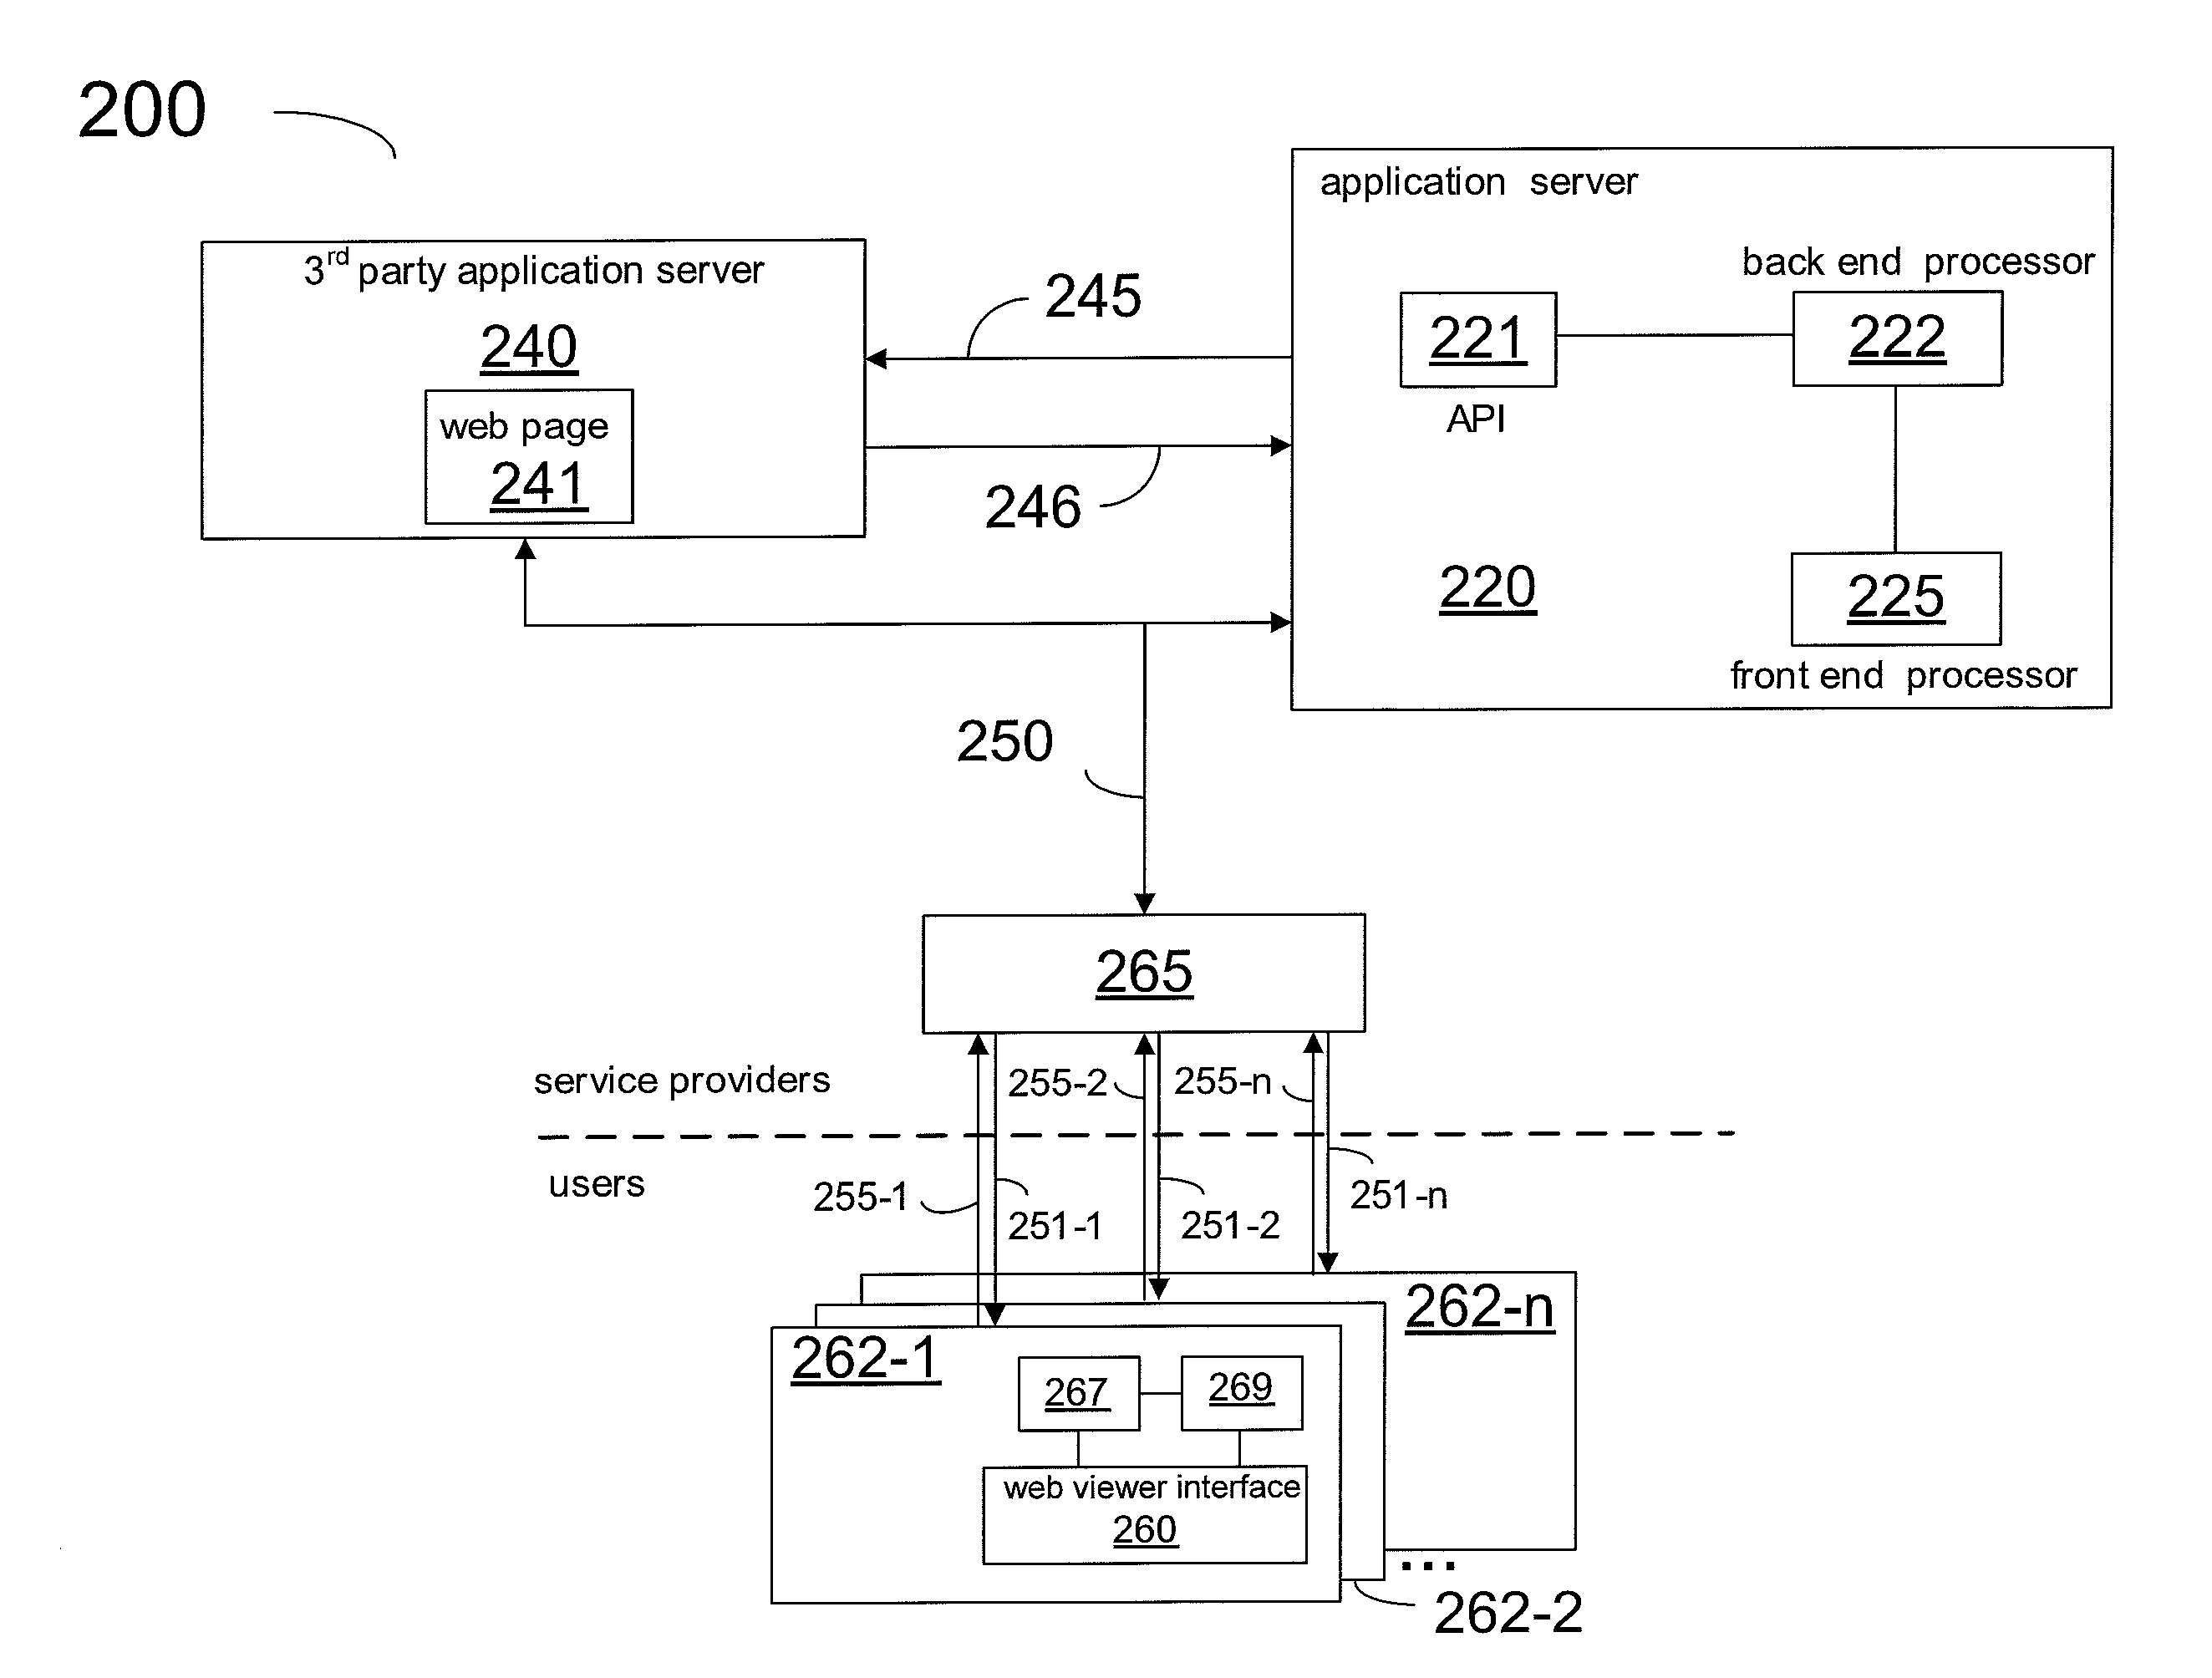 Method and system for an advanced player in a network of multiple live video sources